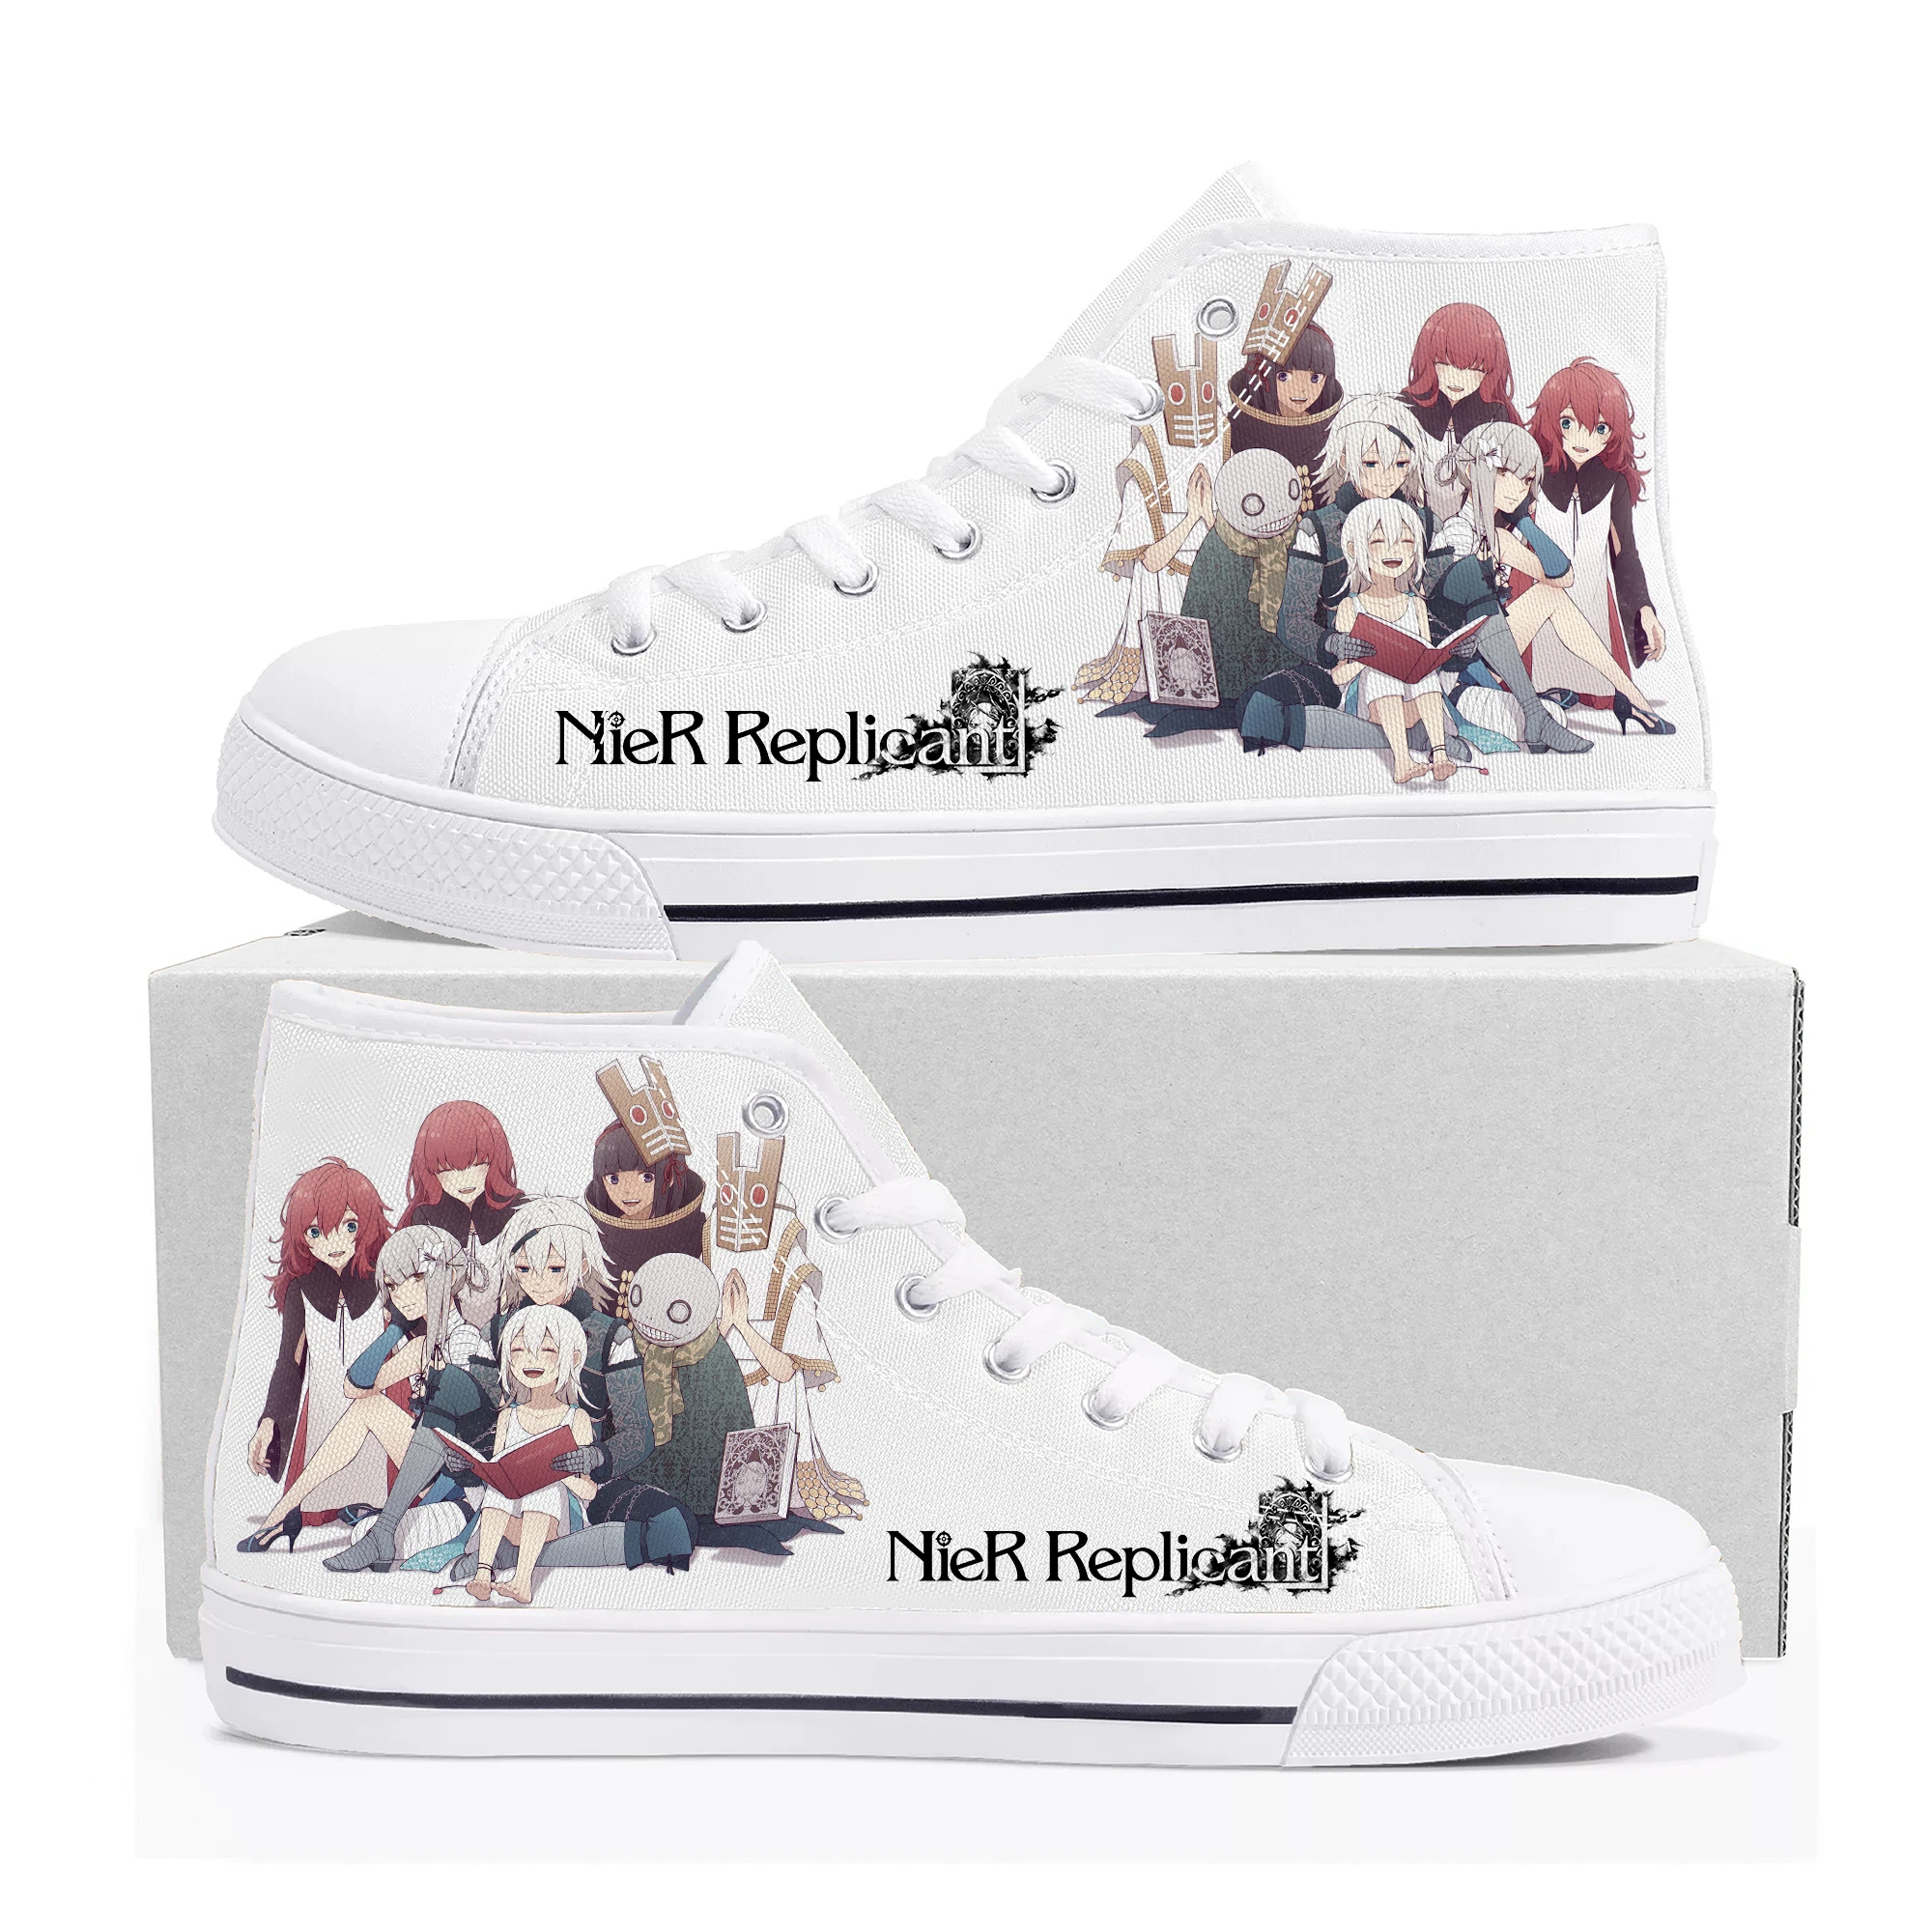 

Nier Replicant High Top Sneakers Cartoon Game Mens Womens Teenager High Quality Fashion Canvas Shoes Casual Tailor Made Sneaker